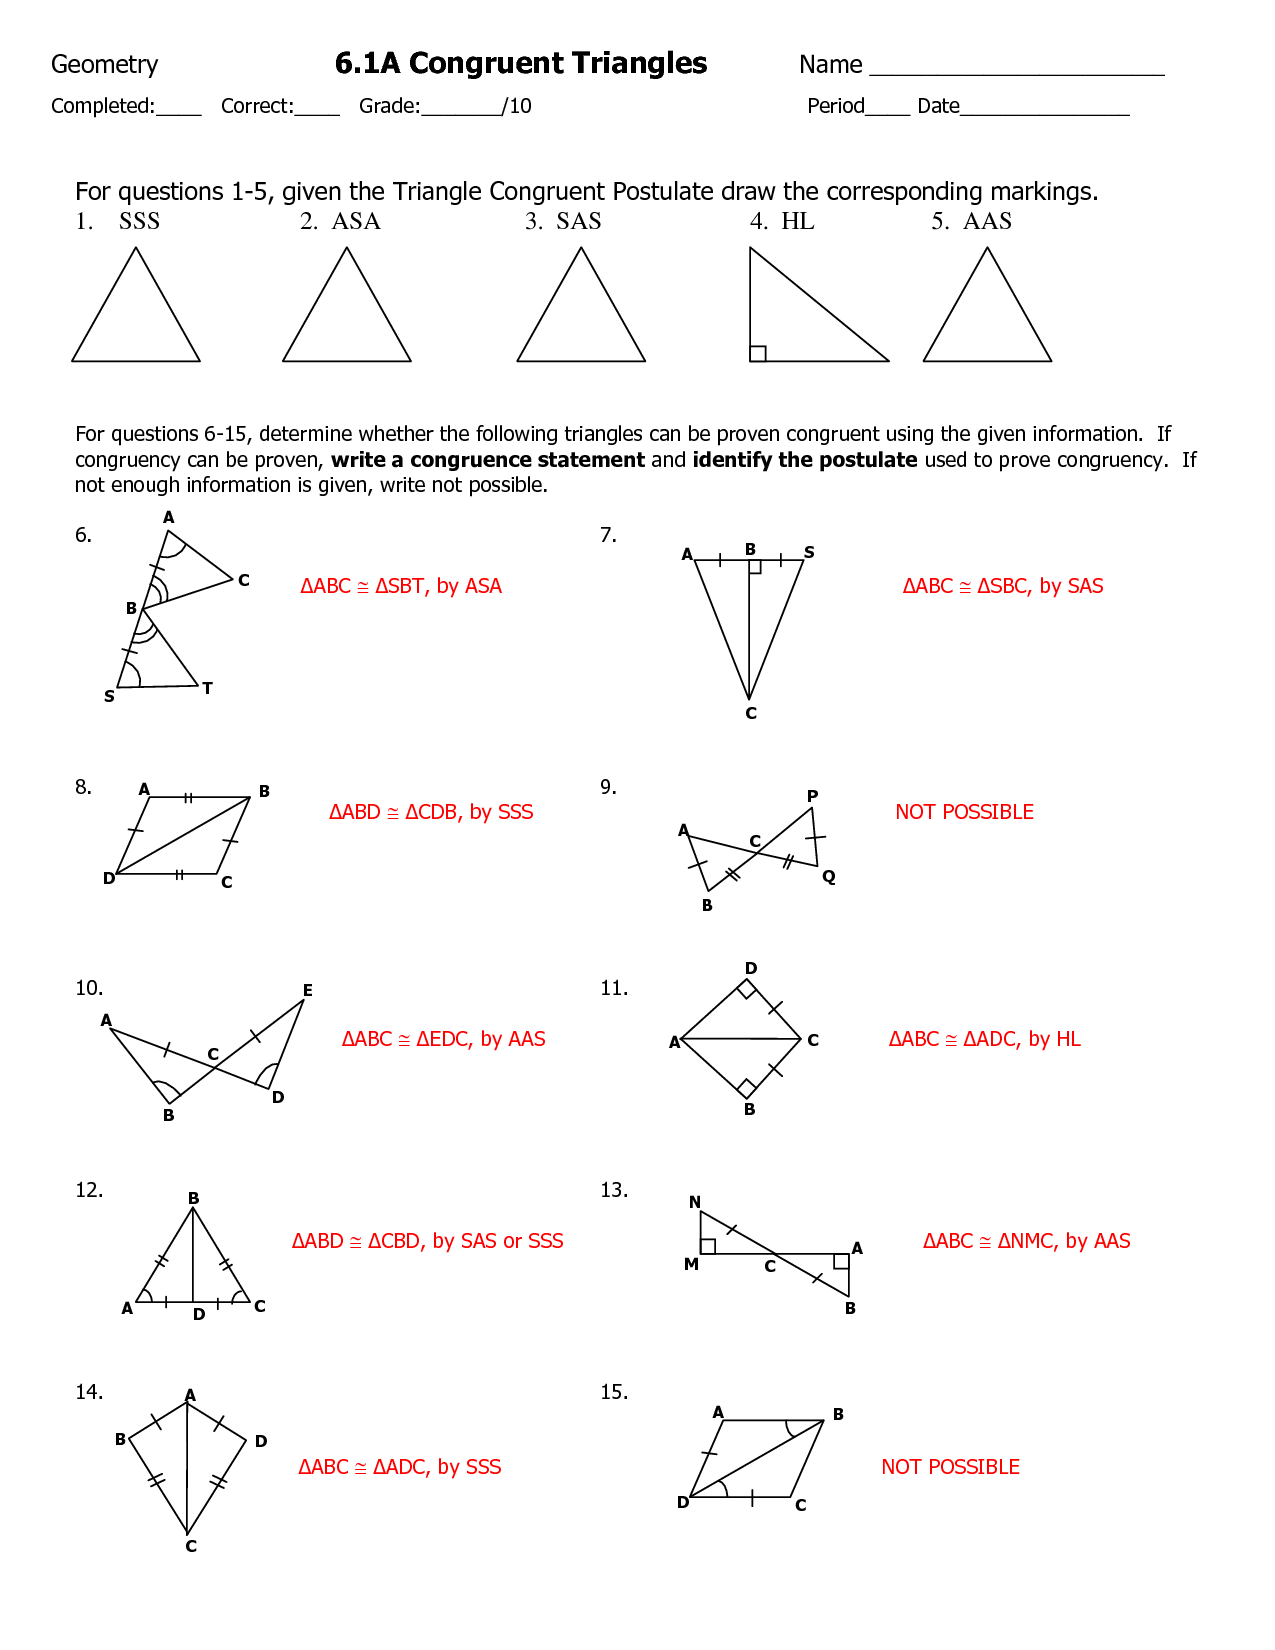 congruent-triangles-worksheet-with-answers-geometry-worksheets-for-practice-and-studyproving